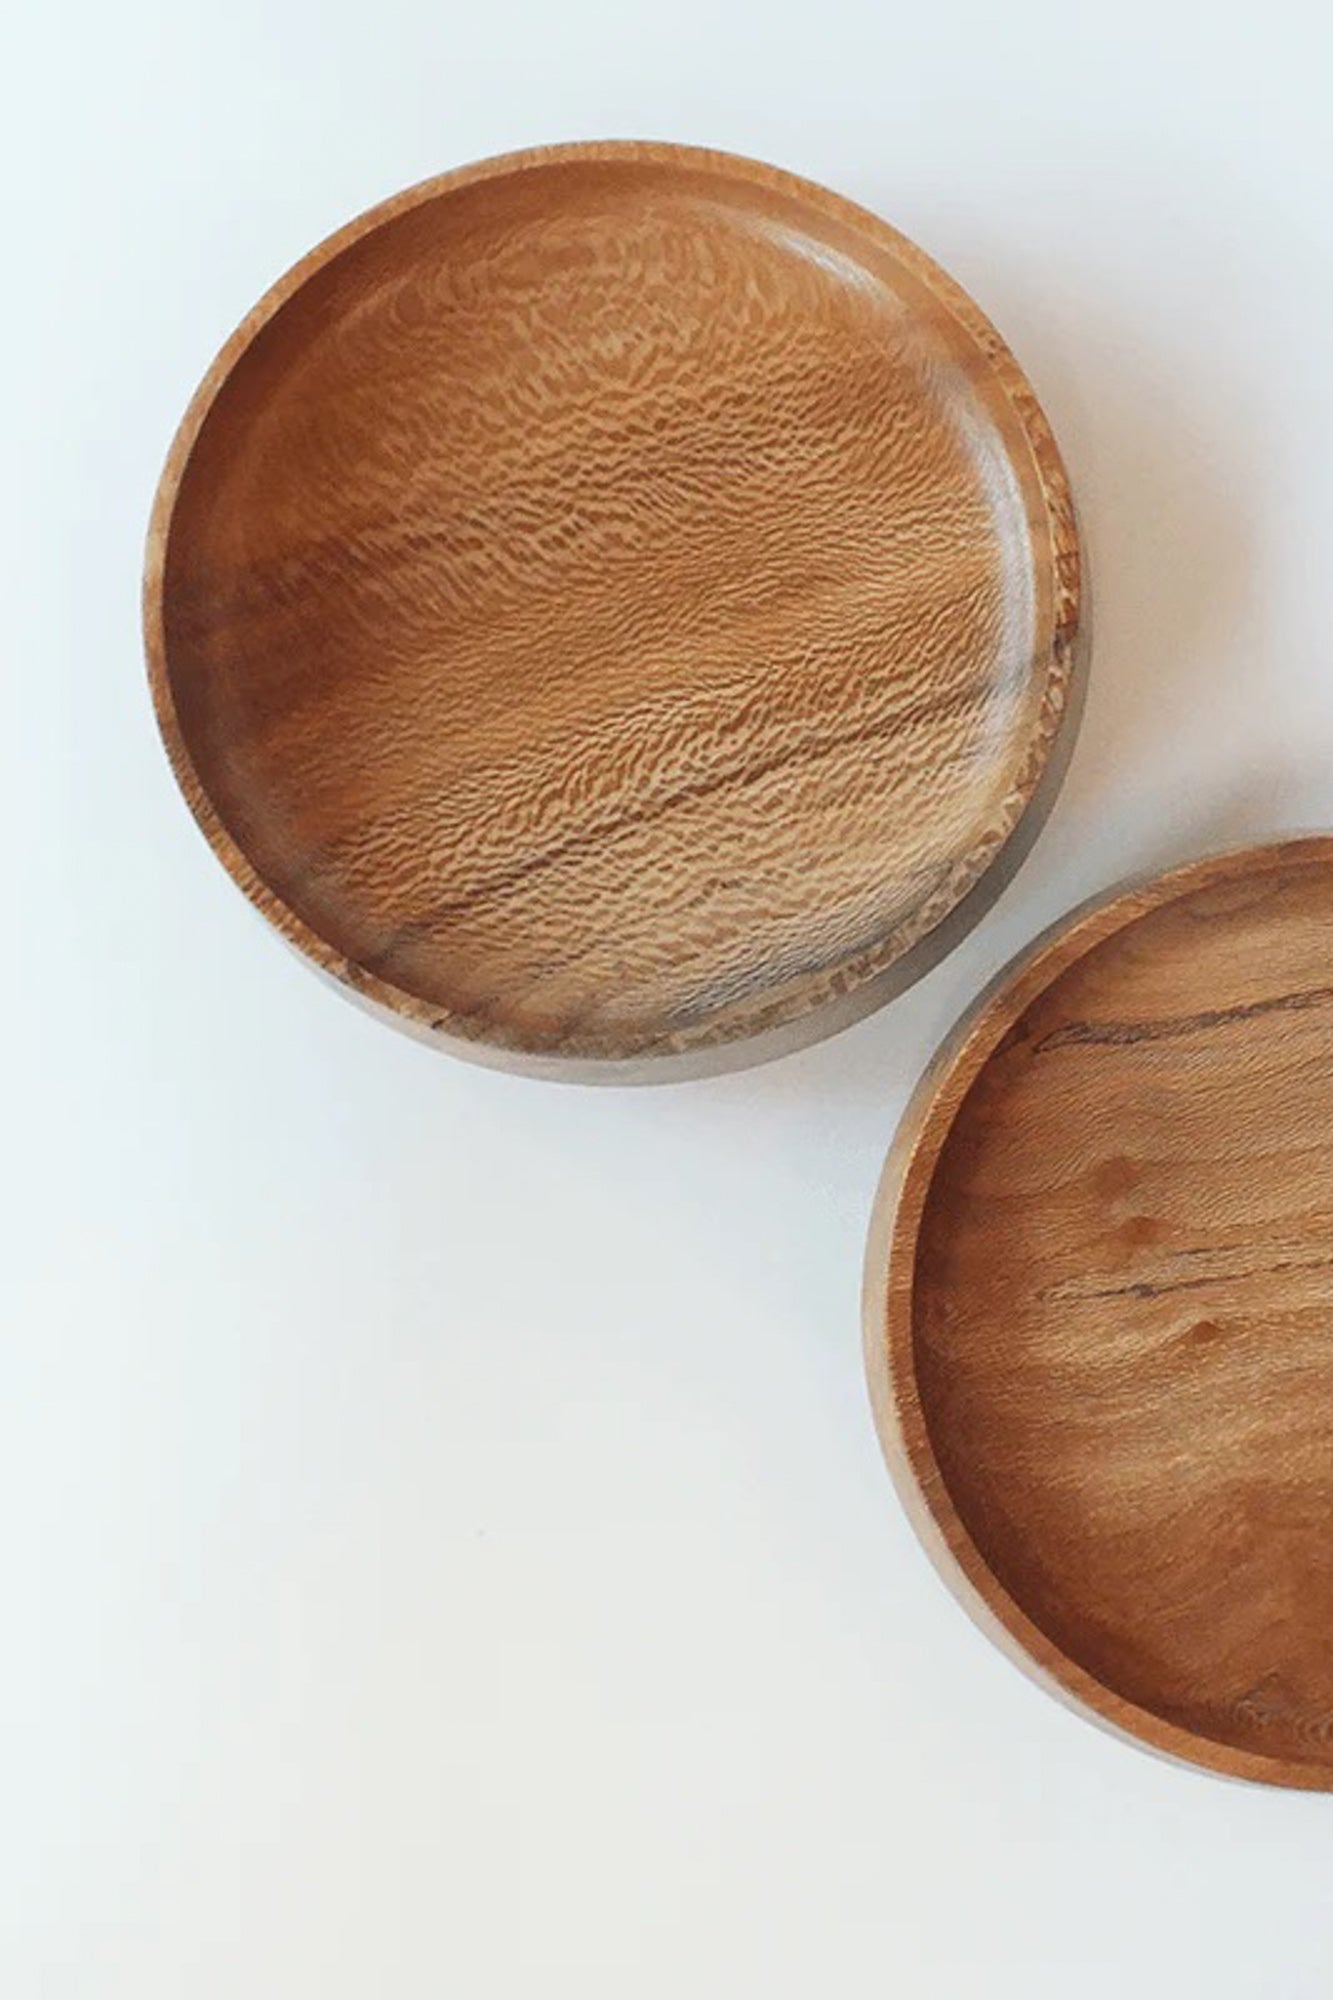 Little Bowl Sycamore Wood displayed on a table or countertop, adding a touch of organic elegance to the dining experience. Each piece is made from old city trees by local artisans in The Netherlands.